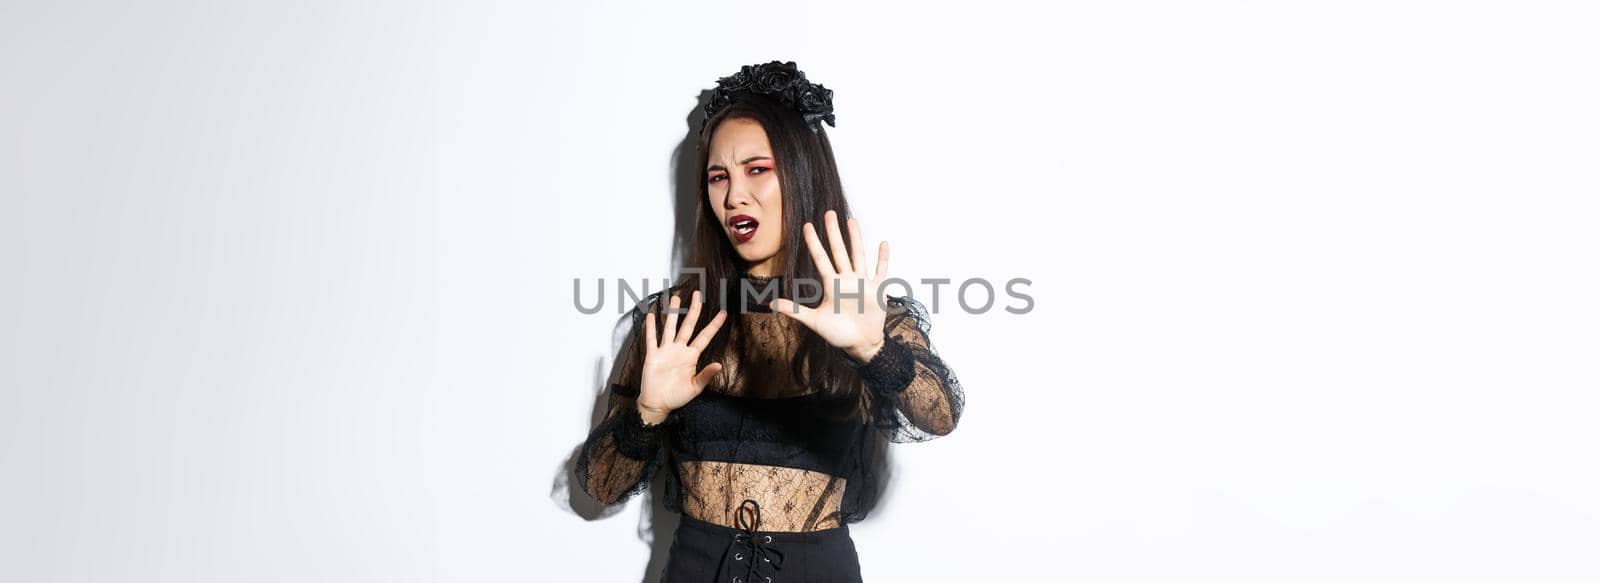 Image of bothered and annoyed asian woman in elegant gothic dress raising hands defensive, grimacing from camera flesh, asking to stop taking pictures of her, standing white background.